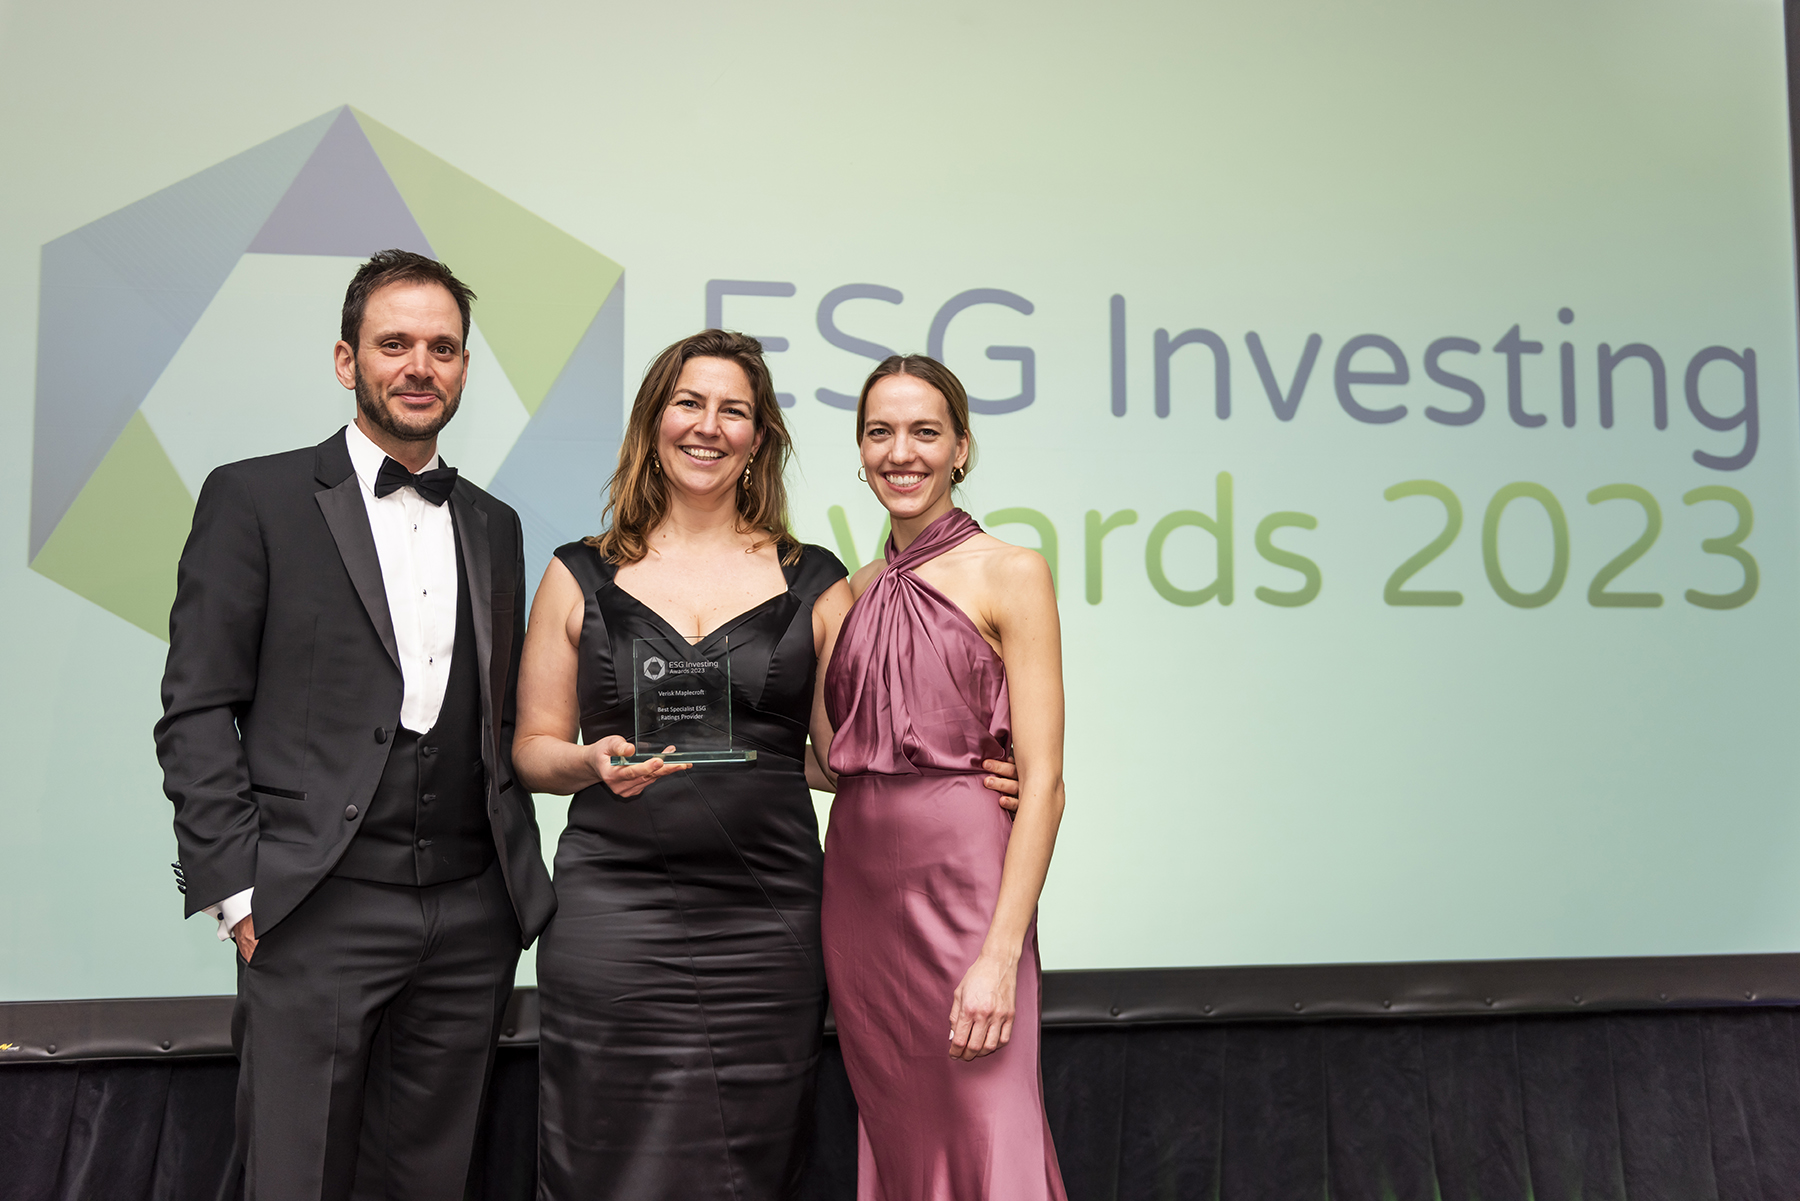 Verisk Maplecroft employees at the ESG Investing Awards